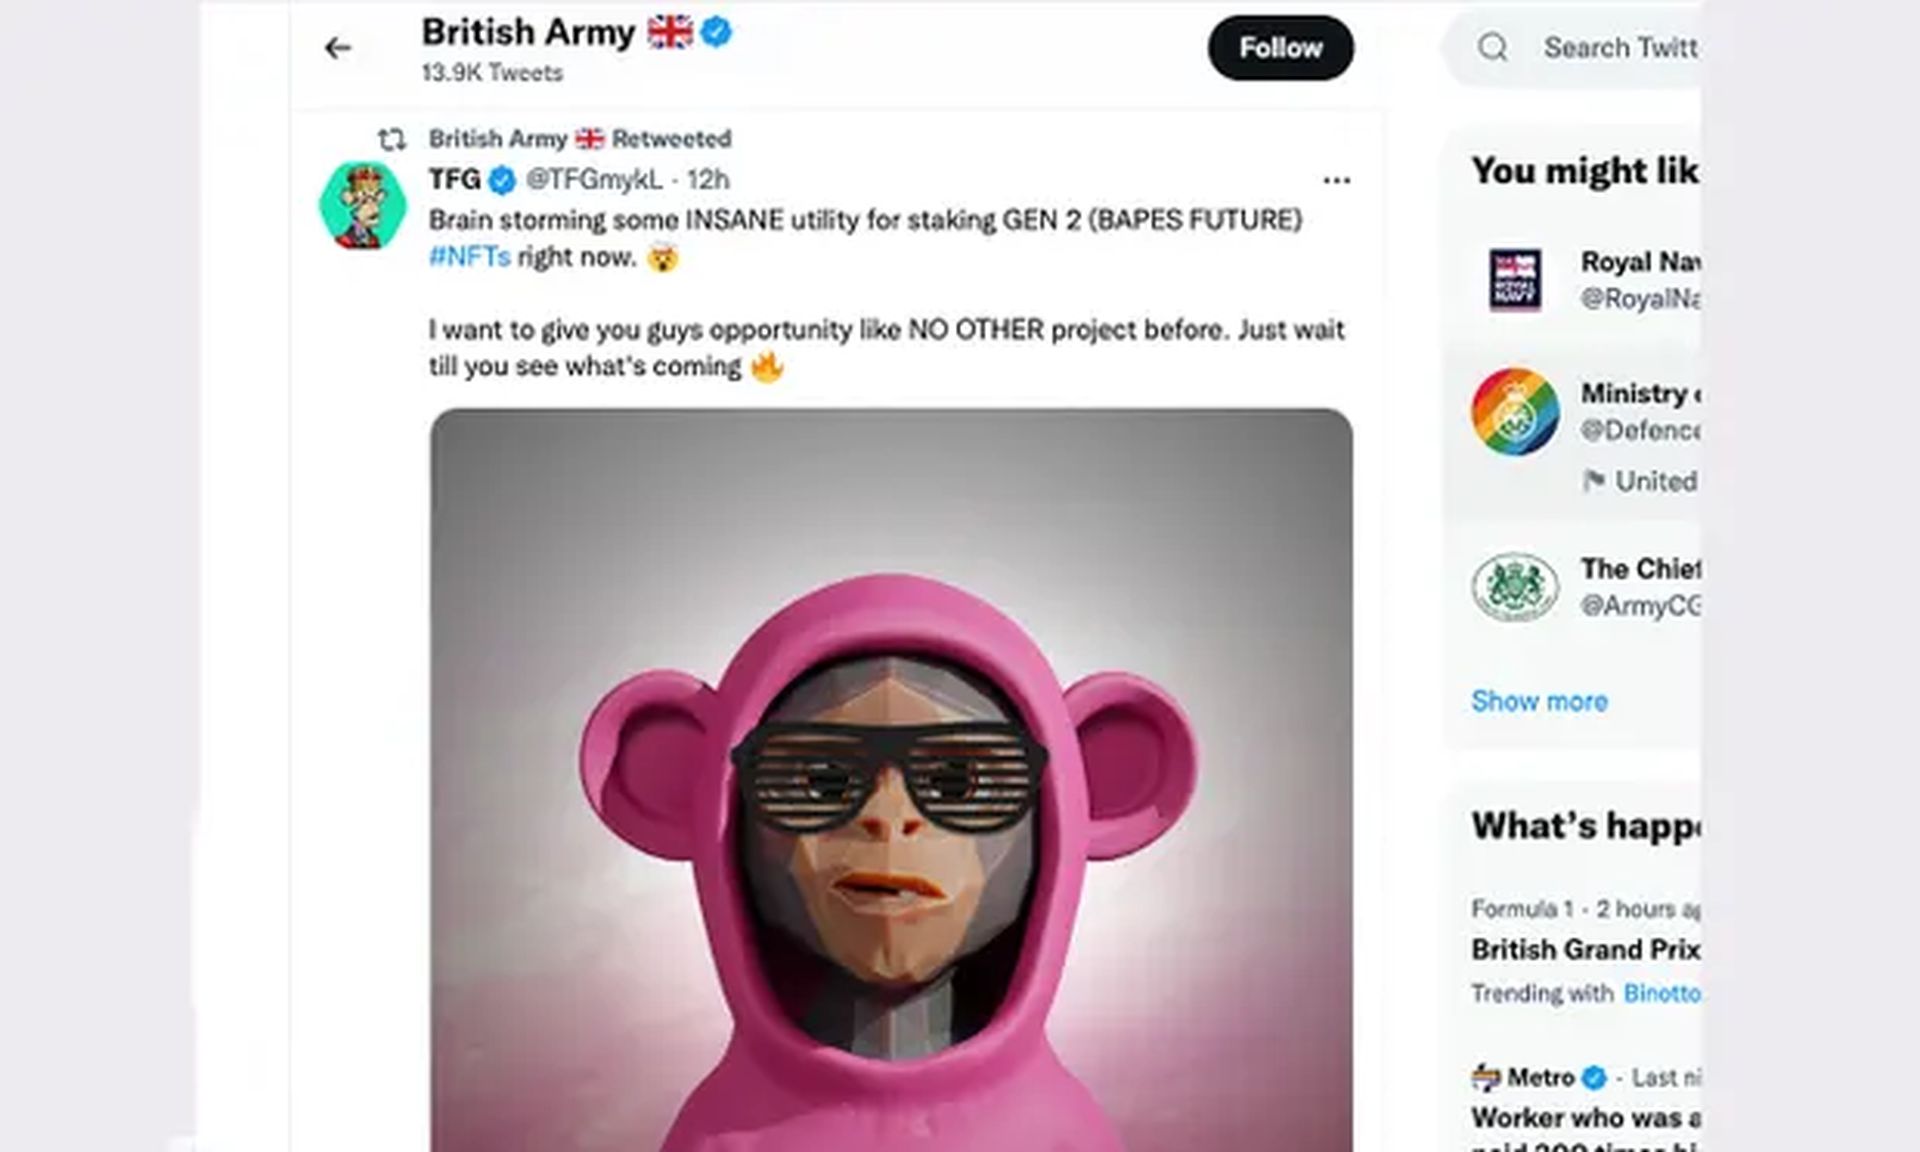 The latest news indicate that British Army Twitter was hacked.